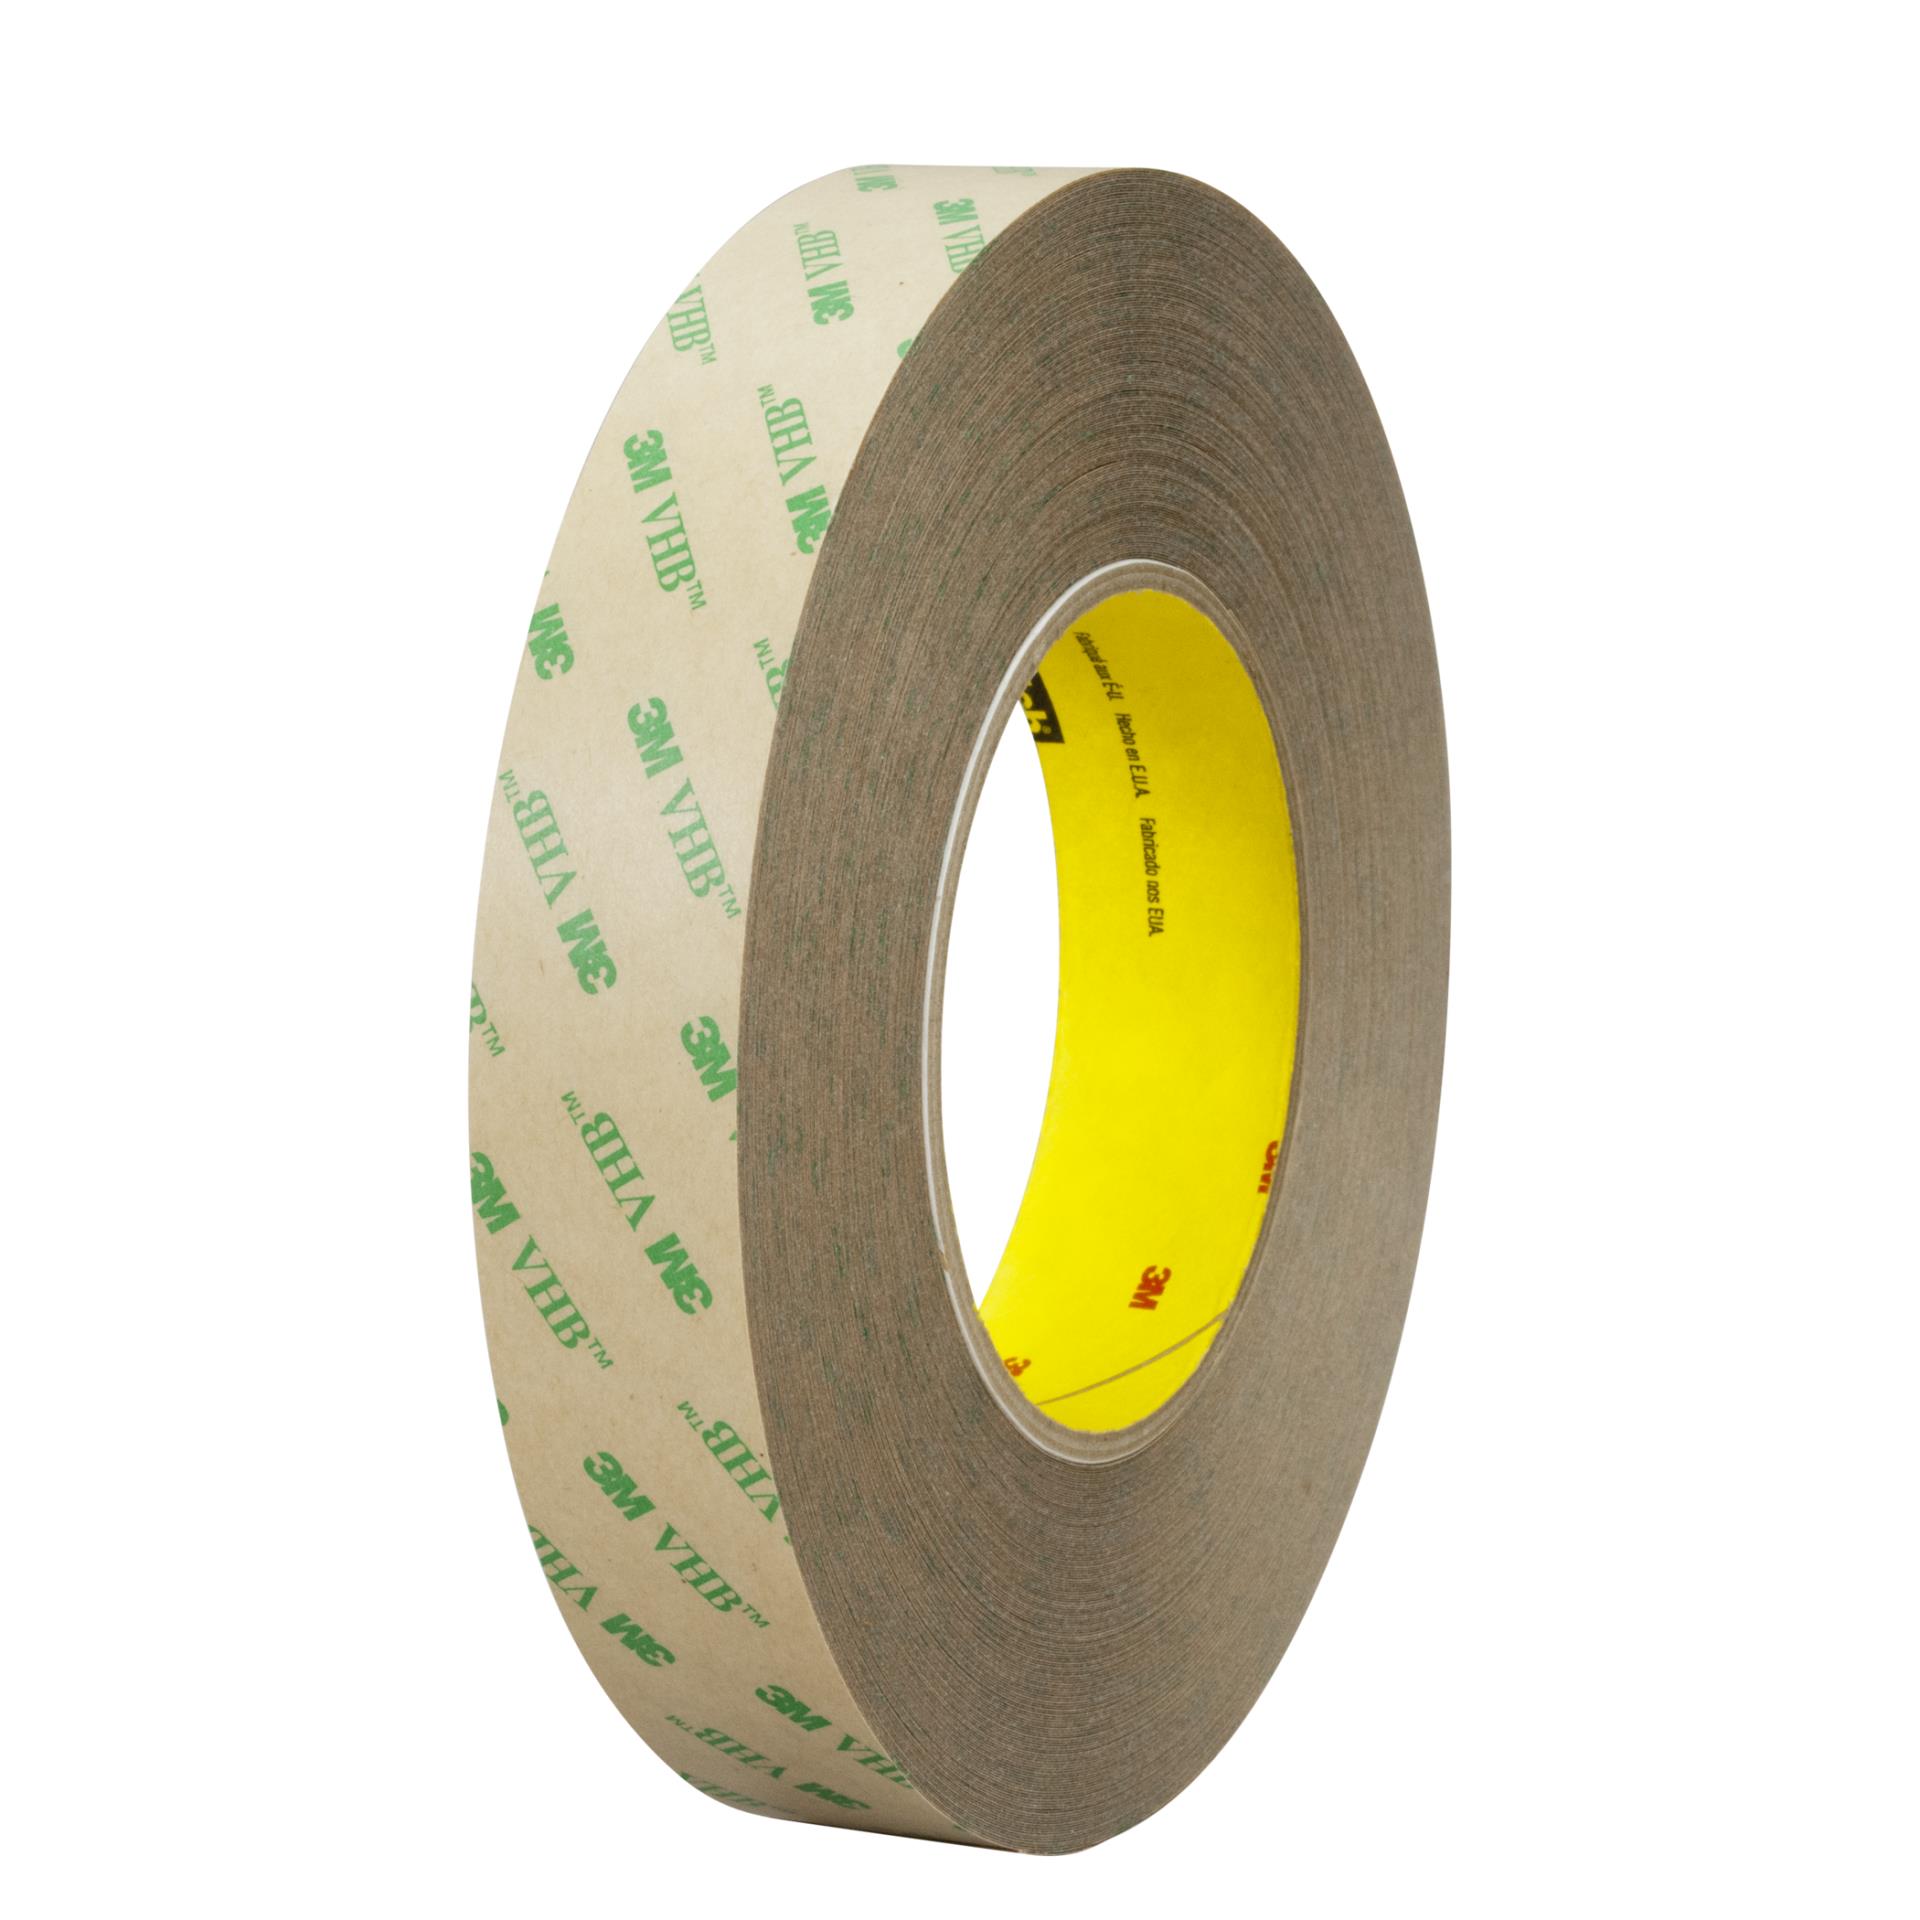 x8-3M™ VHB™ Double Sided Tape Very Strong Adhesive Sticky Pads 19mm x 90mm 